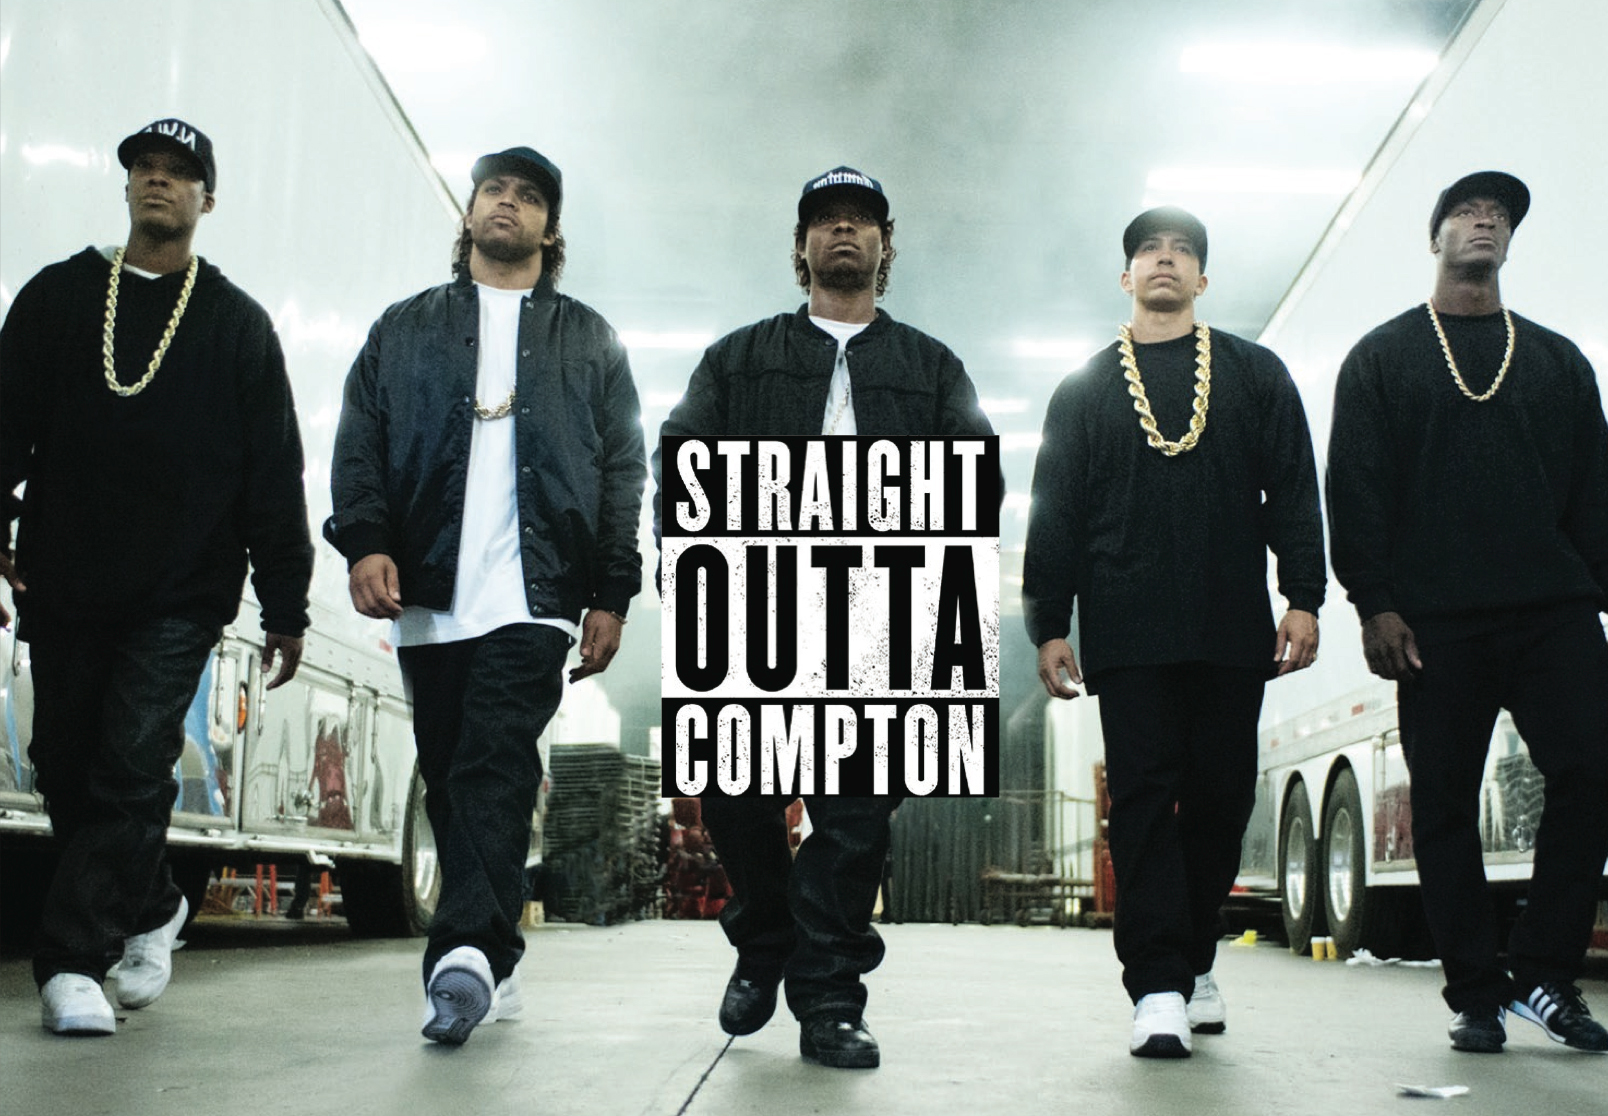 Straight Outta Compton' box office hit rakes in $60.2M over weekend de...